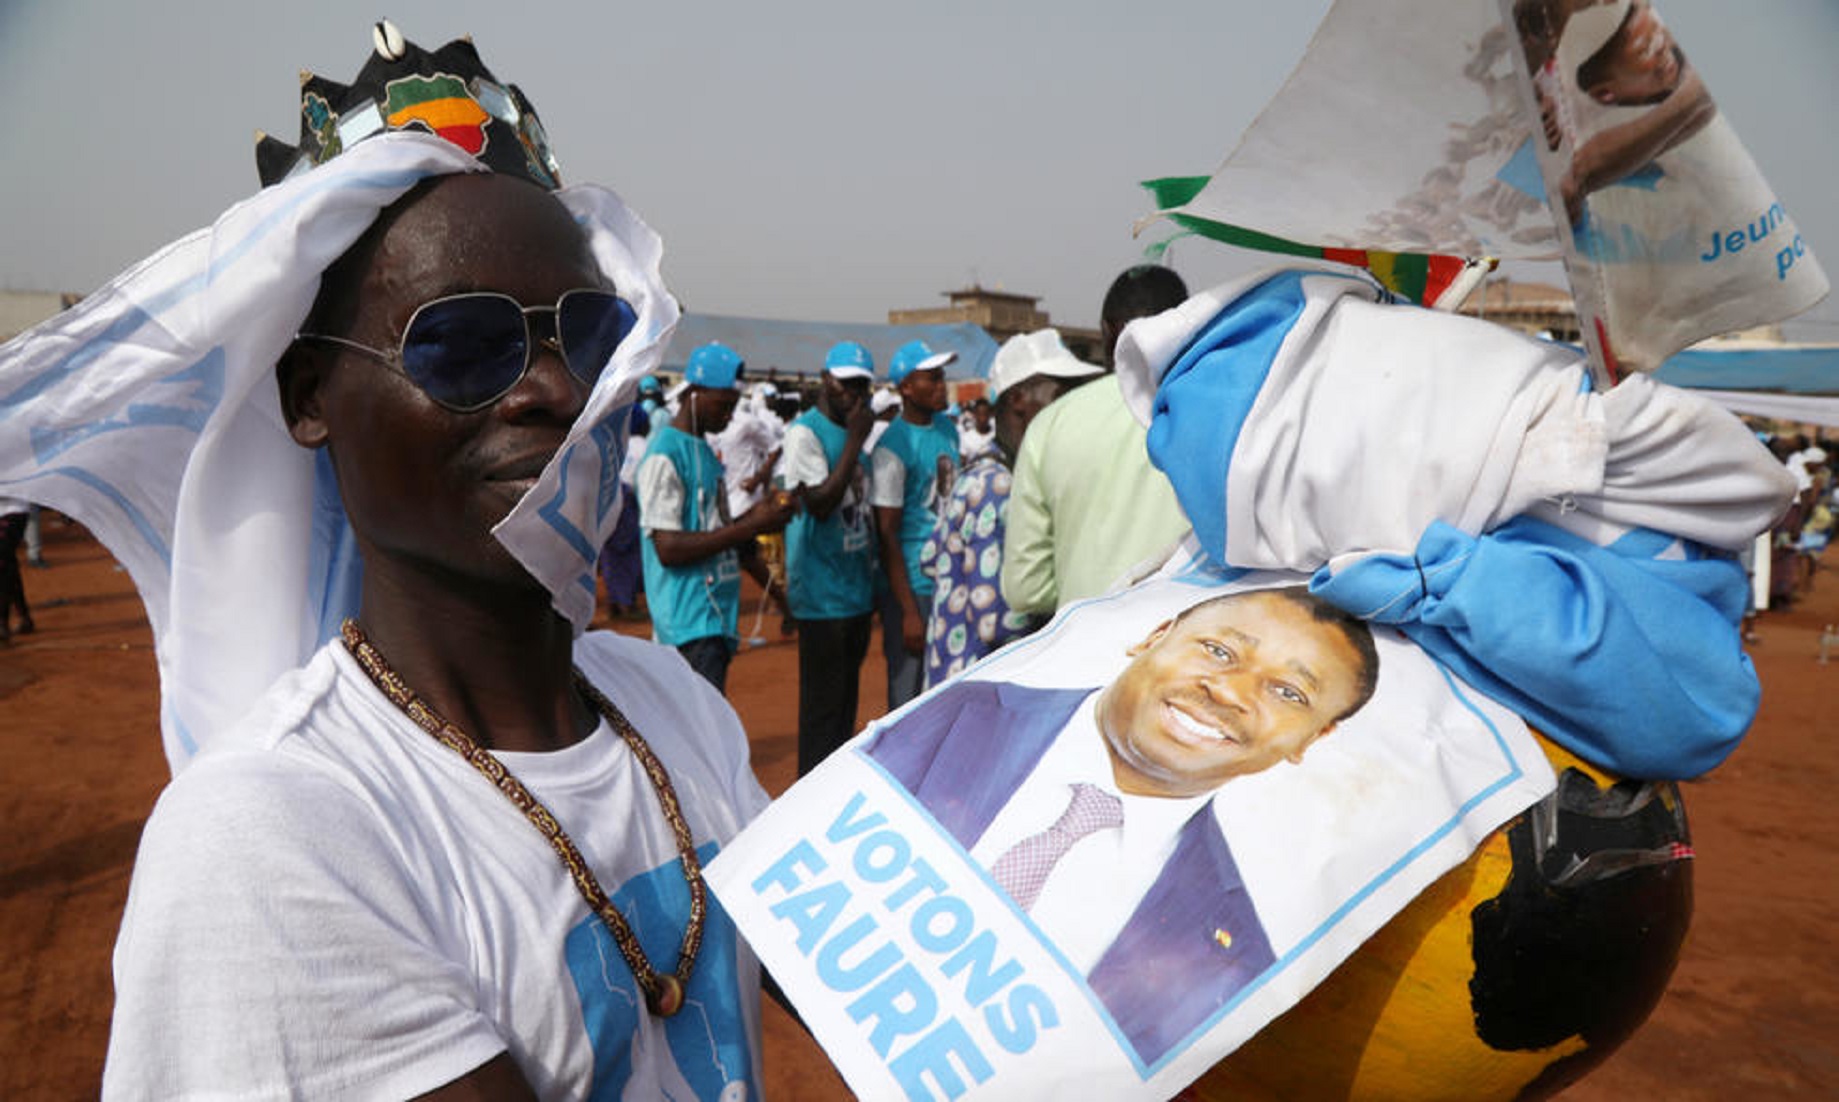 Update: Togo President Faure Gnassingbe wins fourth term, according to provisional results